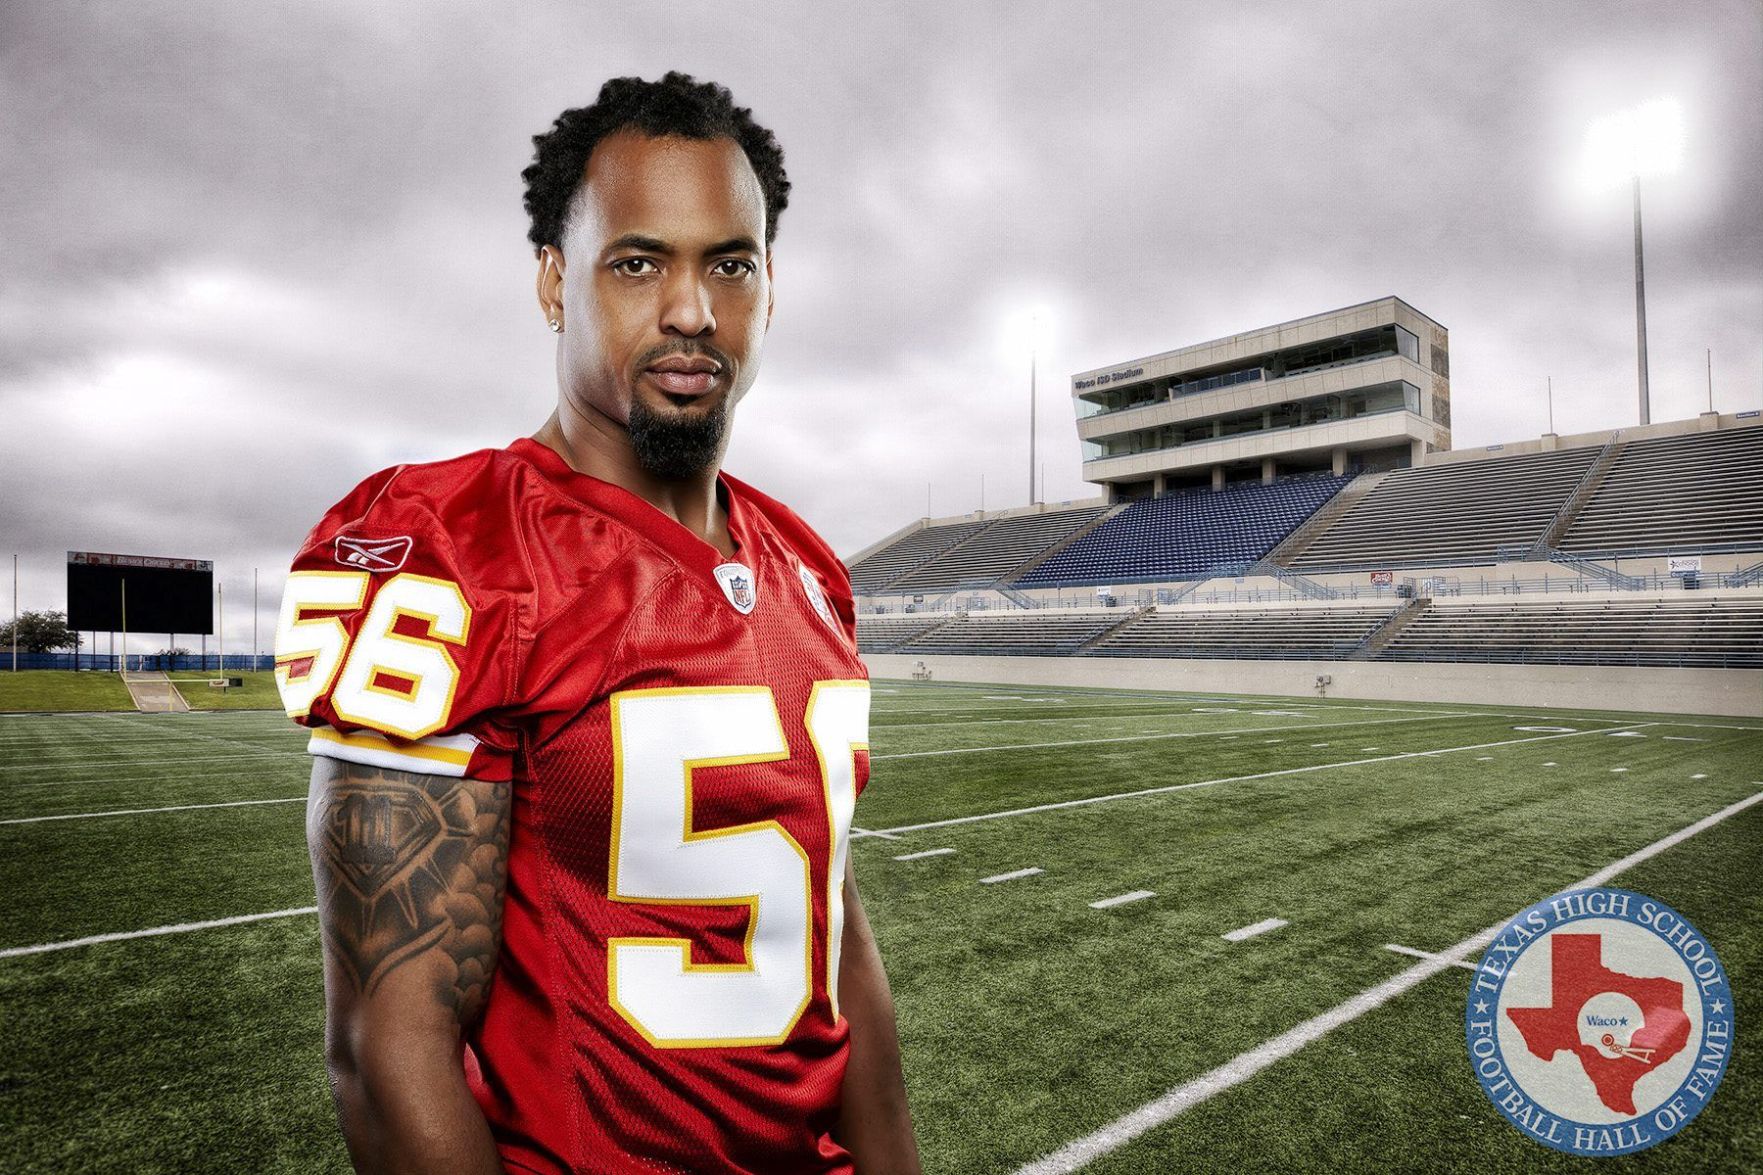 One of the greats: Waco High's Derrick Johnson to be honored ...